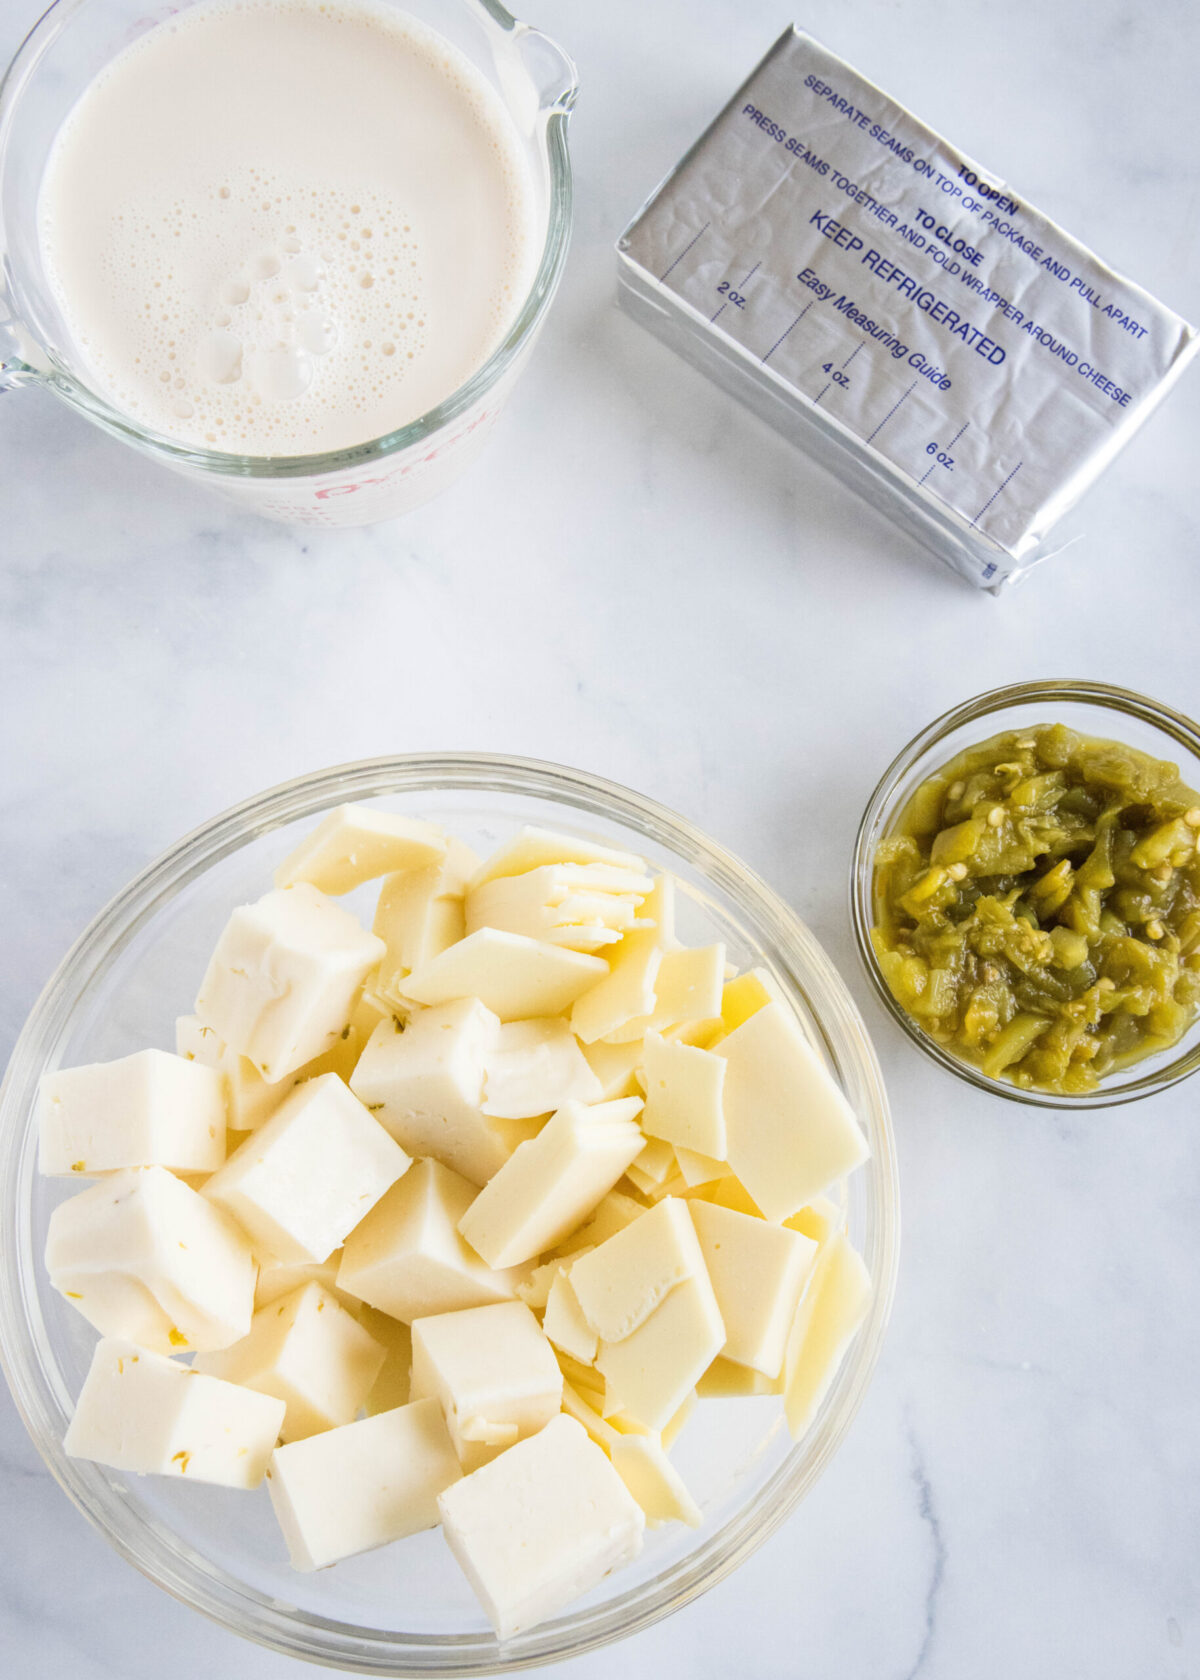 Overhead view of the ingredients needed for crock pot queso dip: a bowl of cubed American cheese and pepper jack cheese, a pyrex of evaporated milk, a pack of cream cheese, and a bowl of diced green chiles